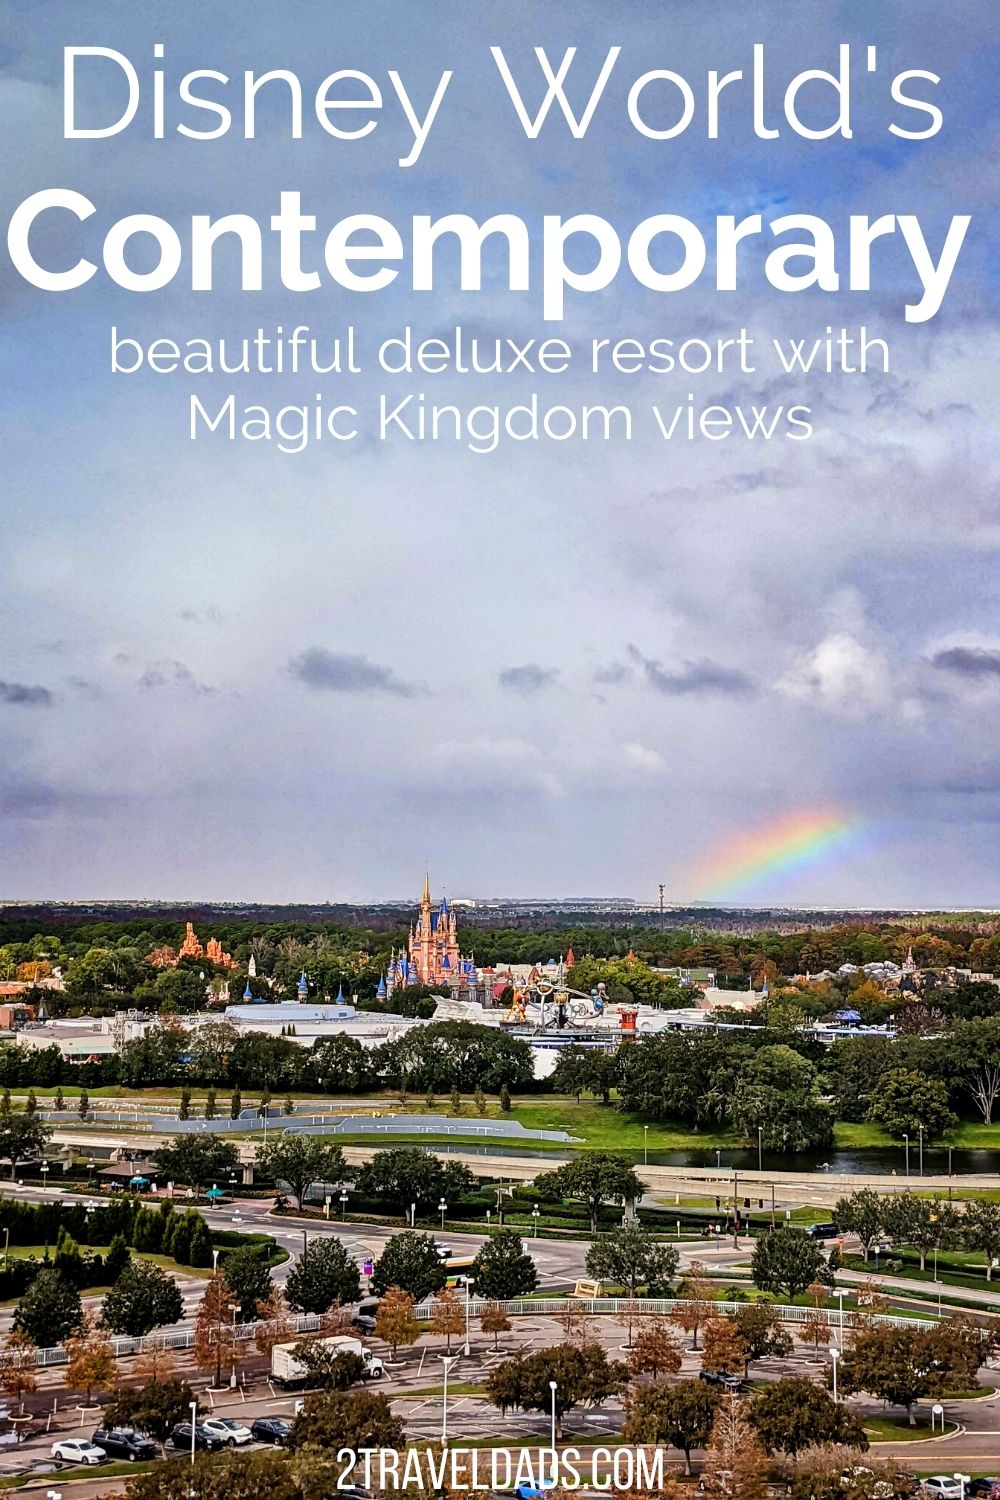 Disney's Contemporary Resort is one of the original Walt Disney World Hotels, and with its latest update, is the coolest property to stay at. See what to expect, amenities, and how to get to the Disney Parks from the Contemporary.